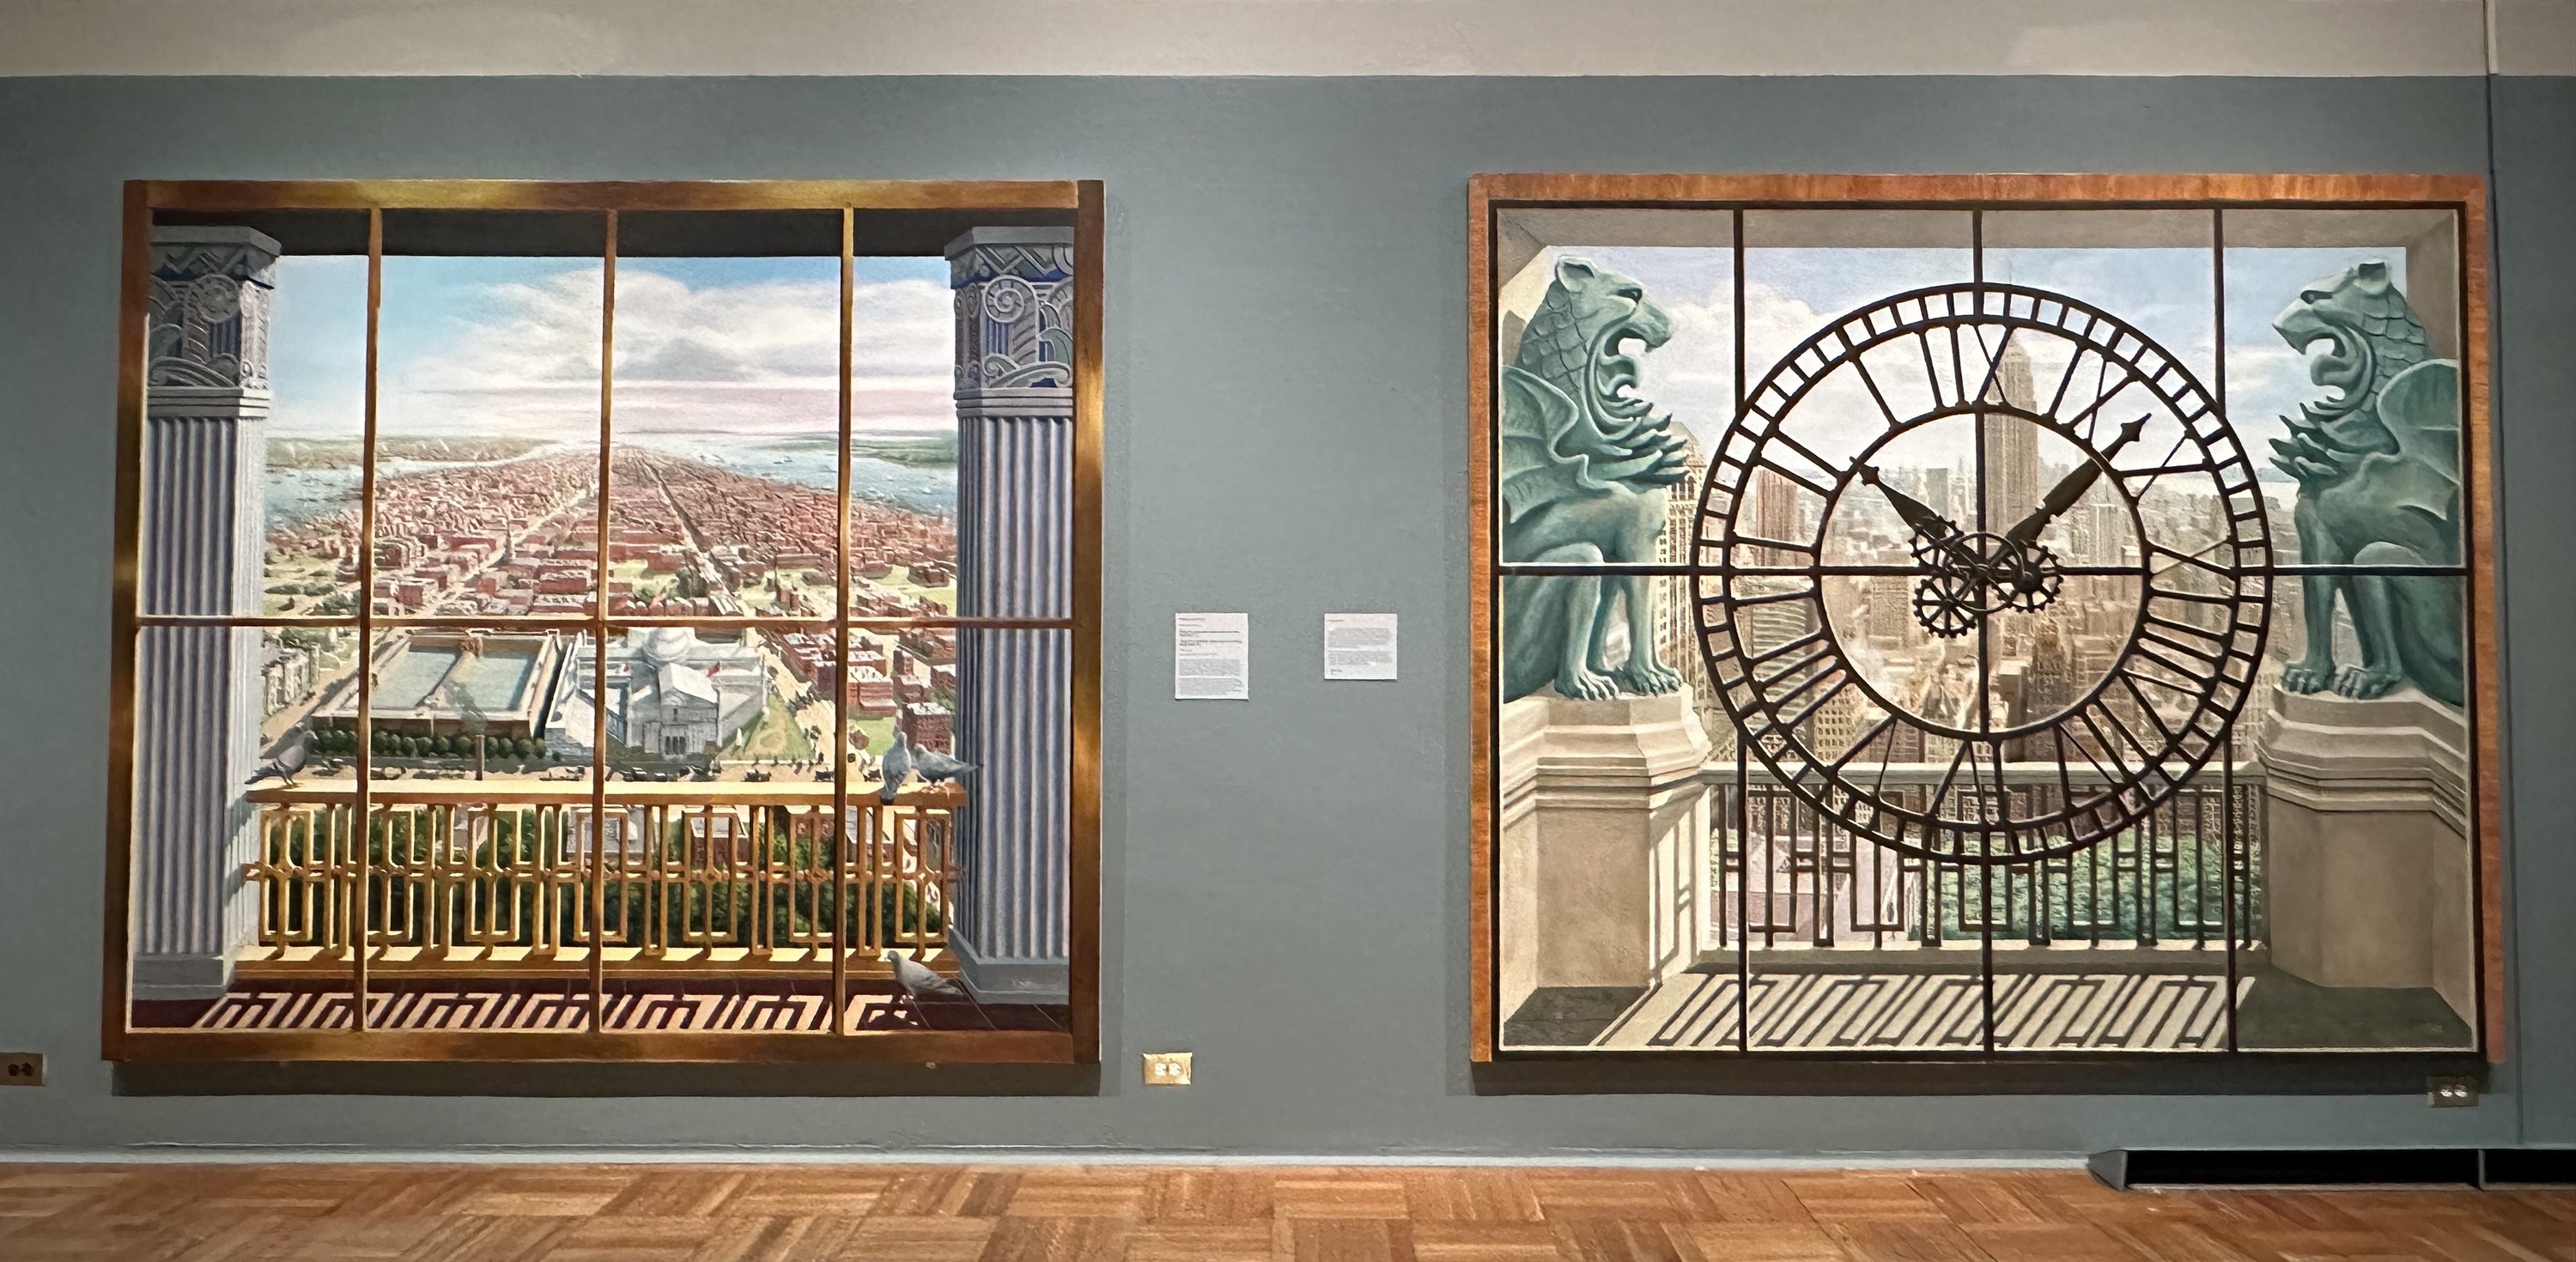 Paintings by Richard Haas looking out onto Manhattan.